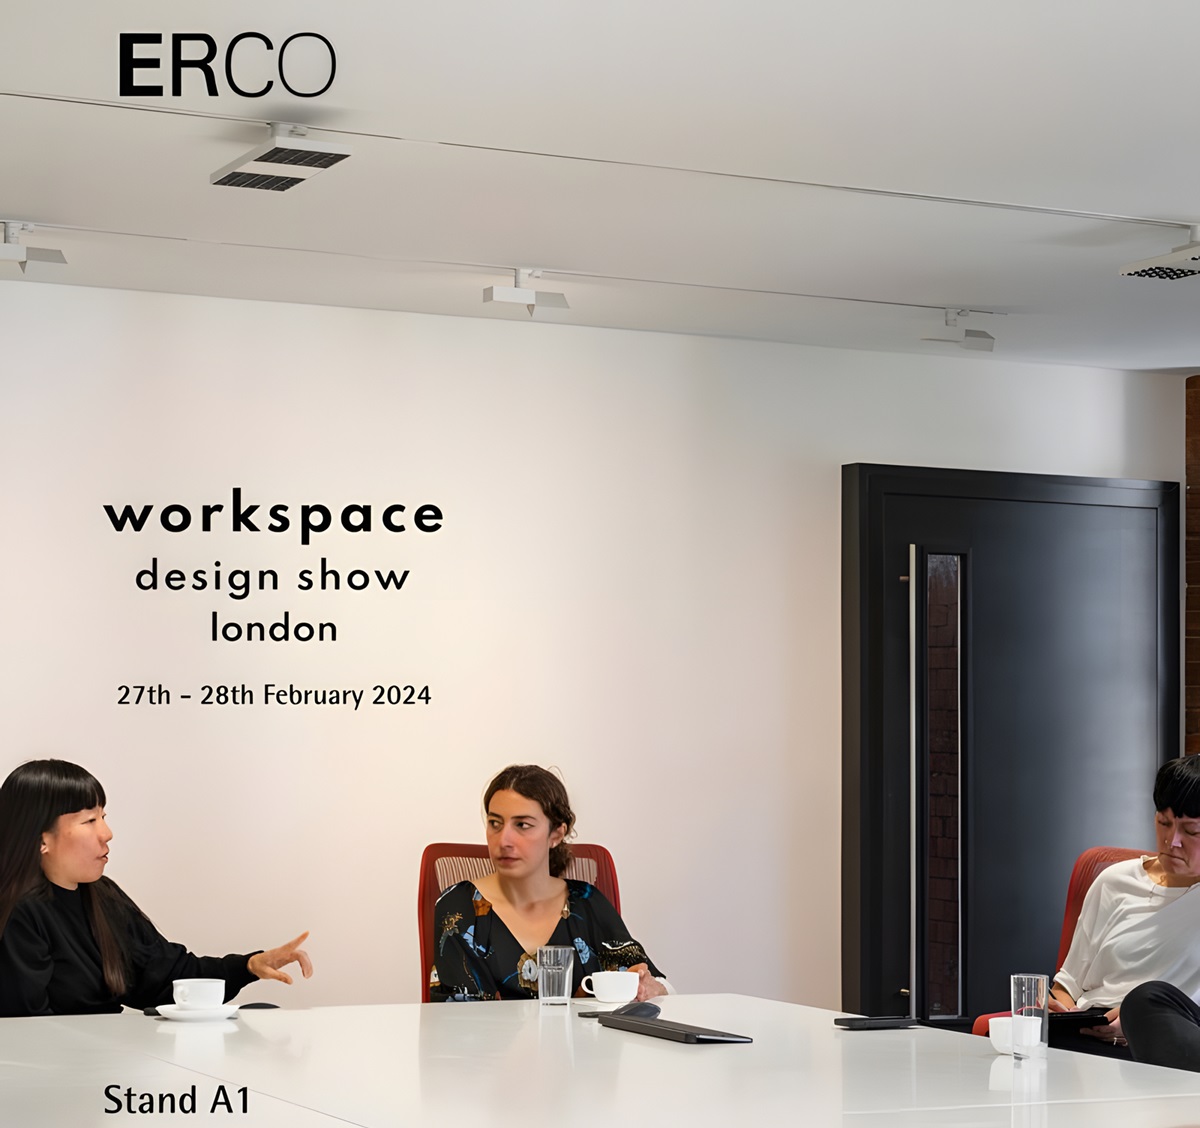 ERCO to Talk You Through Its Latest Projects and Product Innovations at the Workspace Design Show